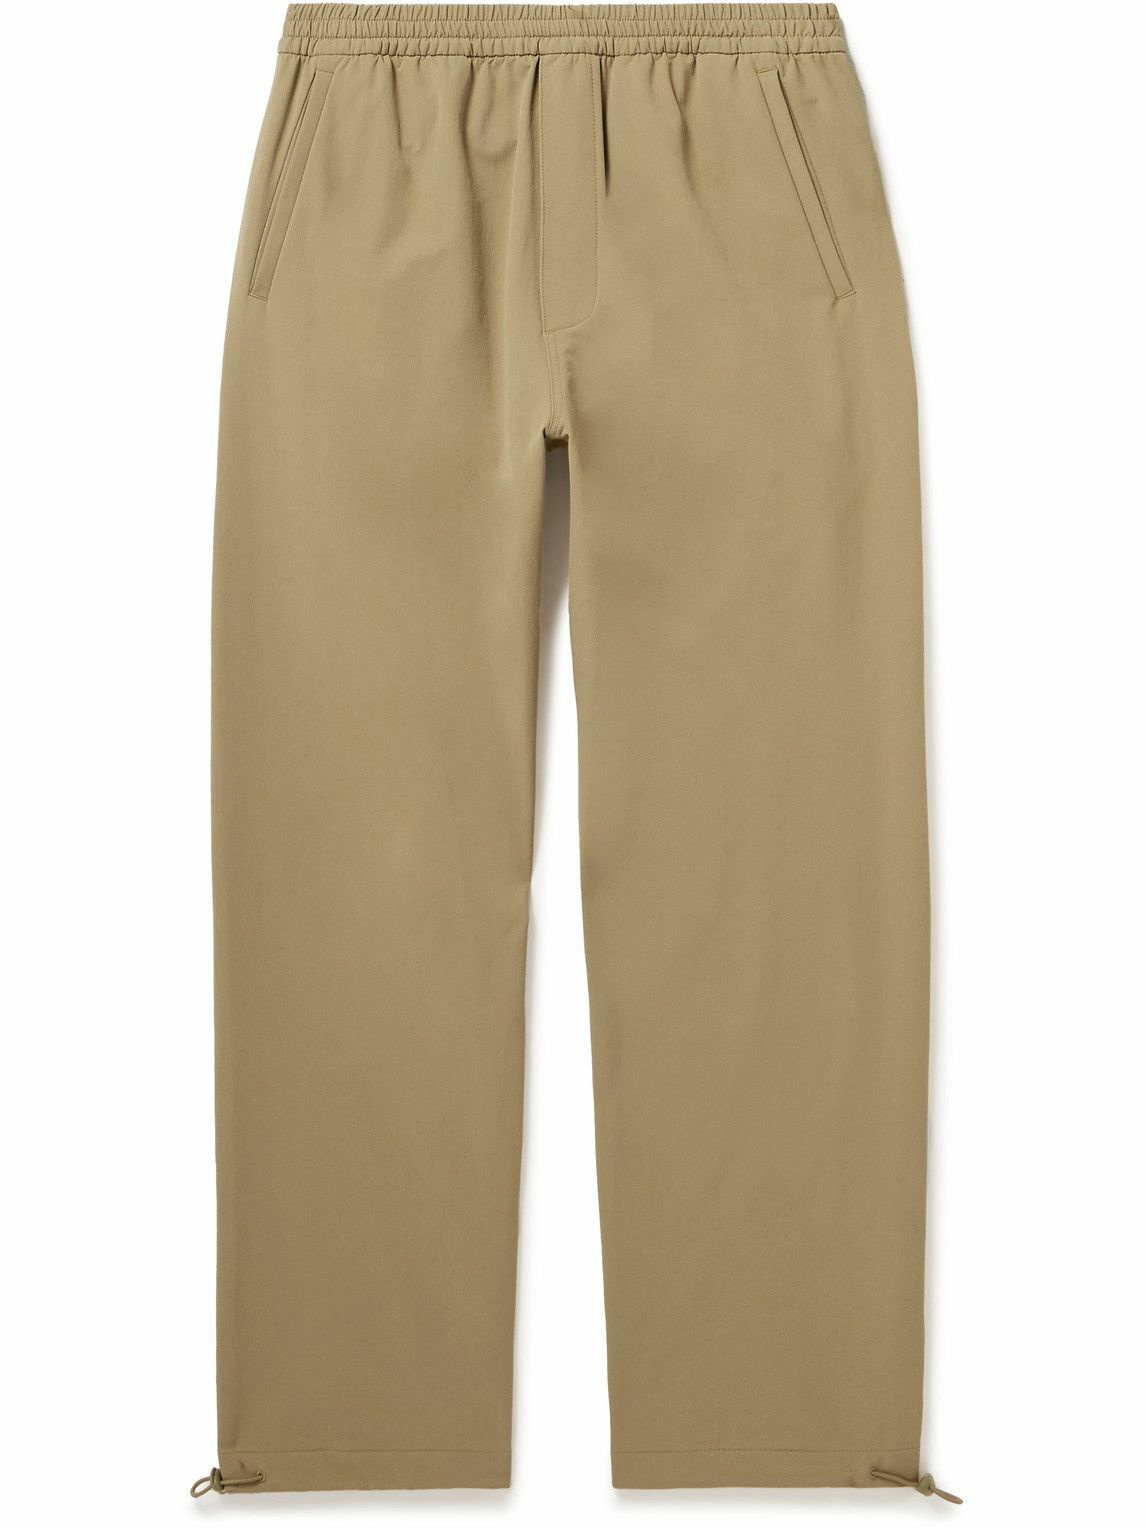 Outdoor Voices - Trek Lightly Tapered RecTrek Drawstring Trousers